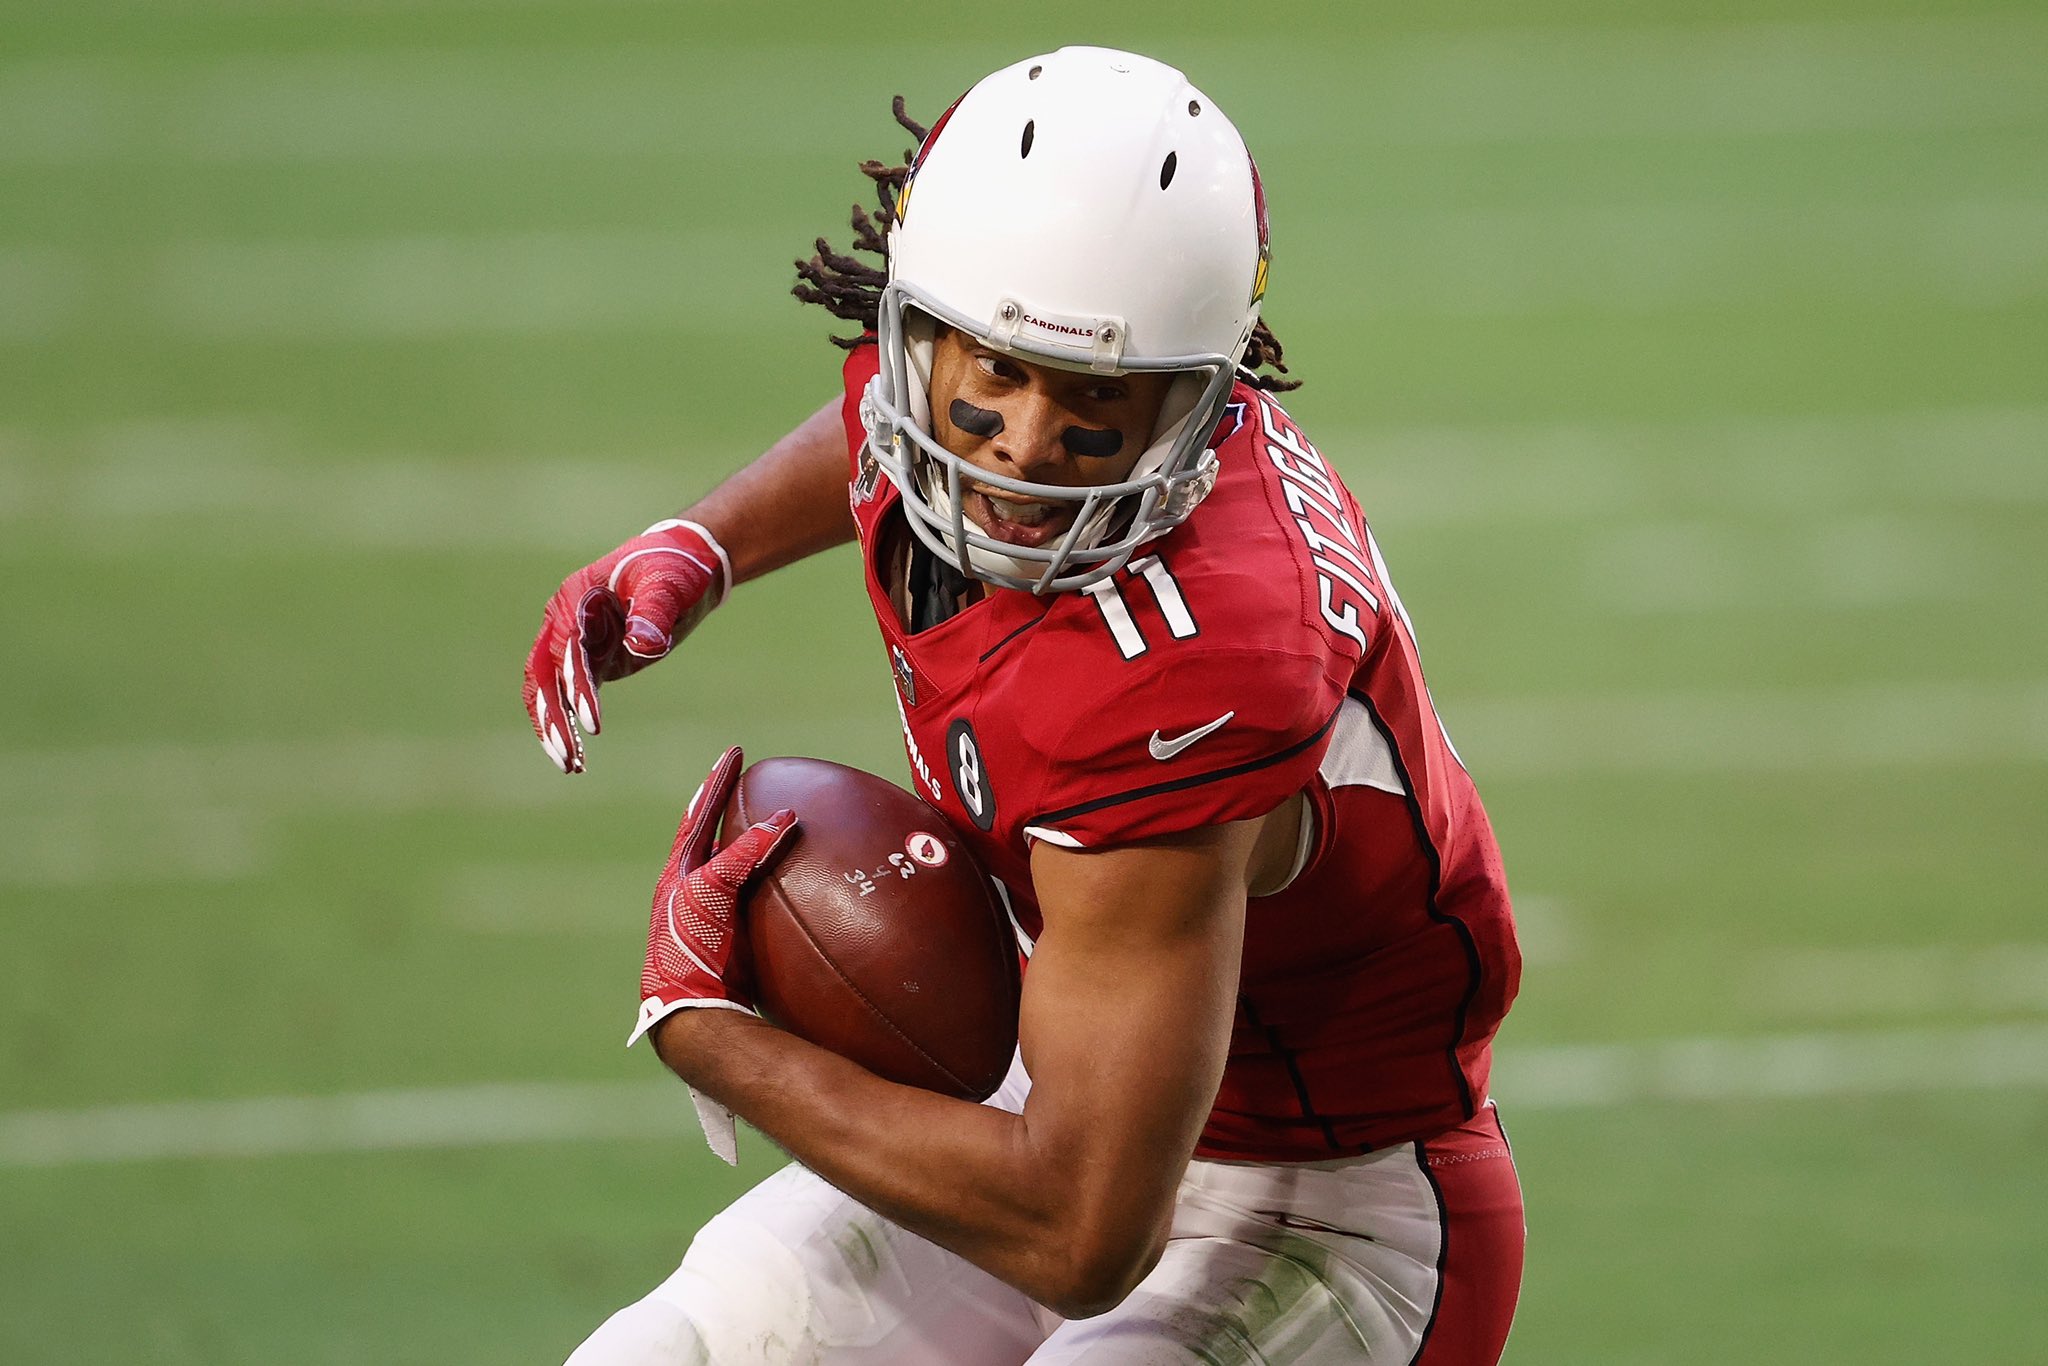 Larry Fitzgerald talks about his work on 'Monday Night Countdown